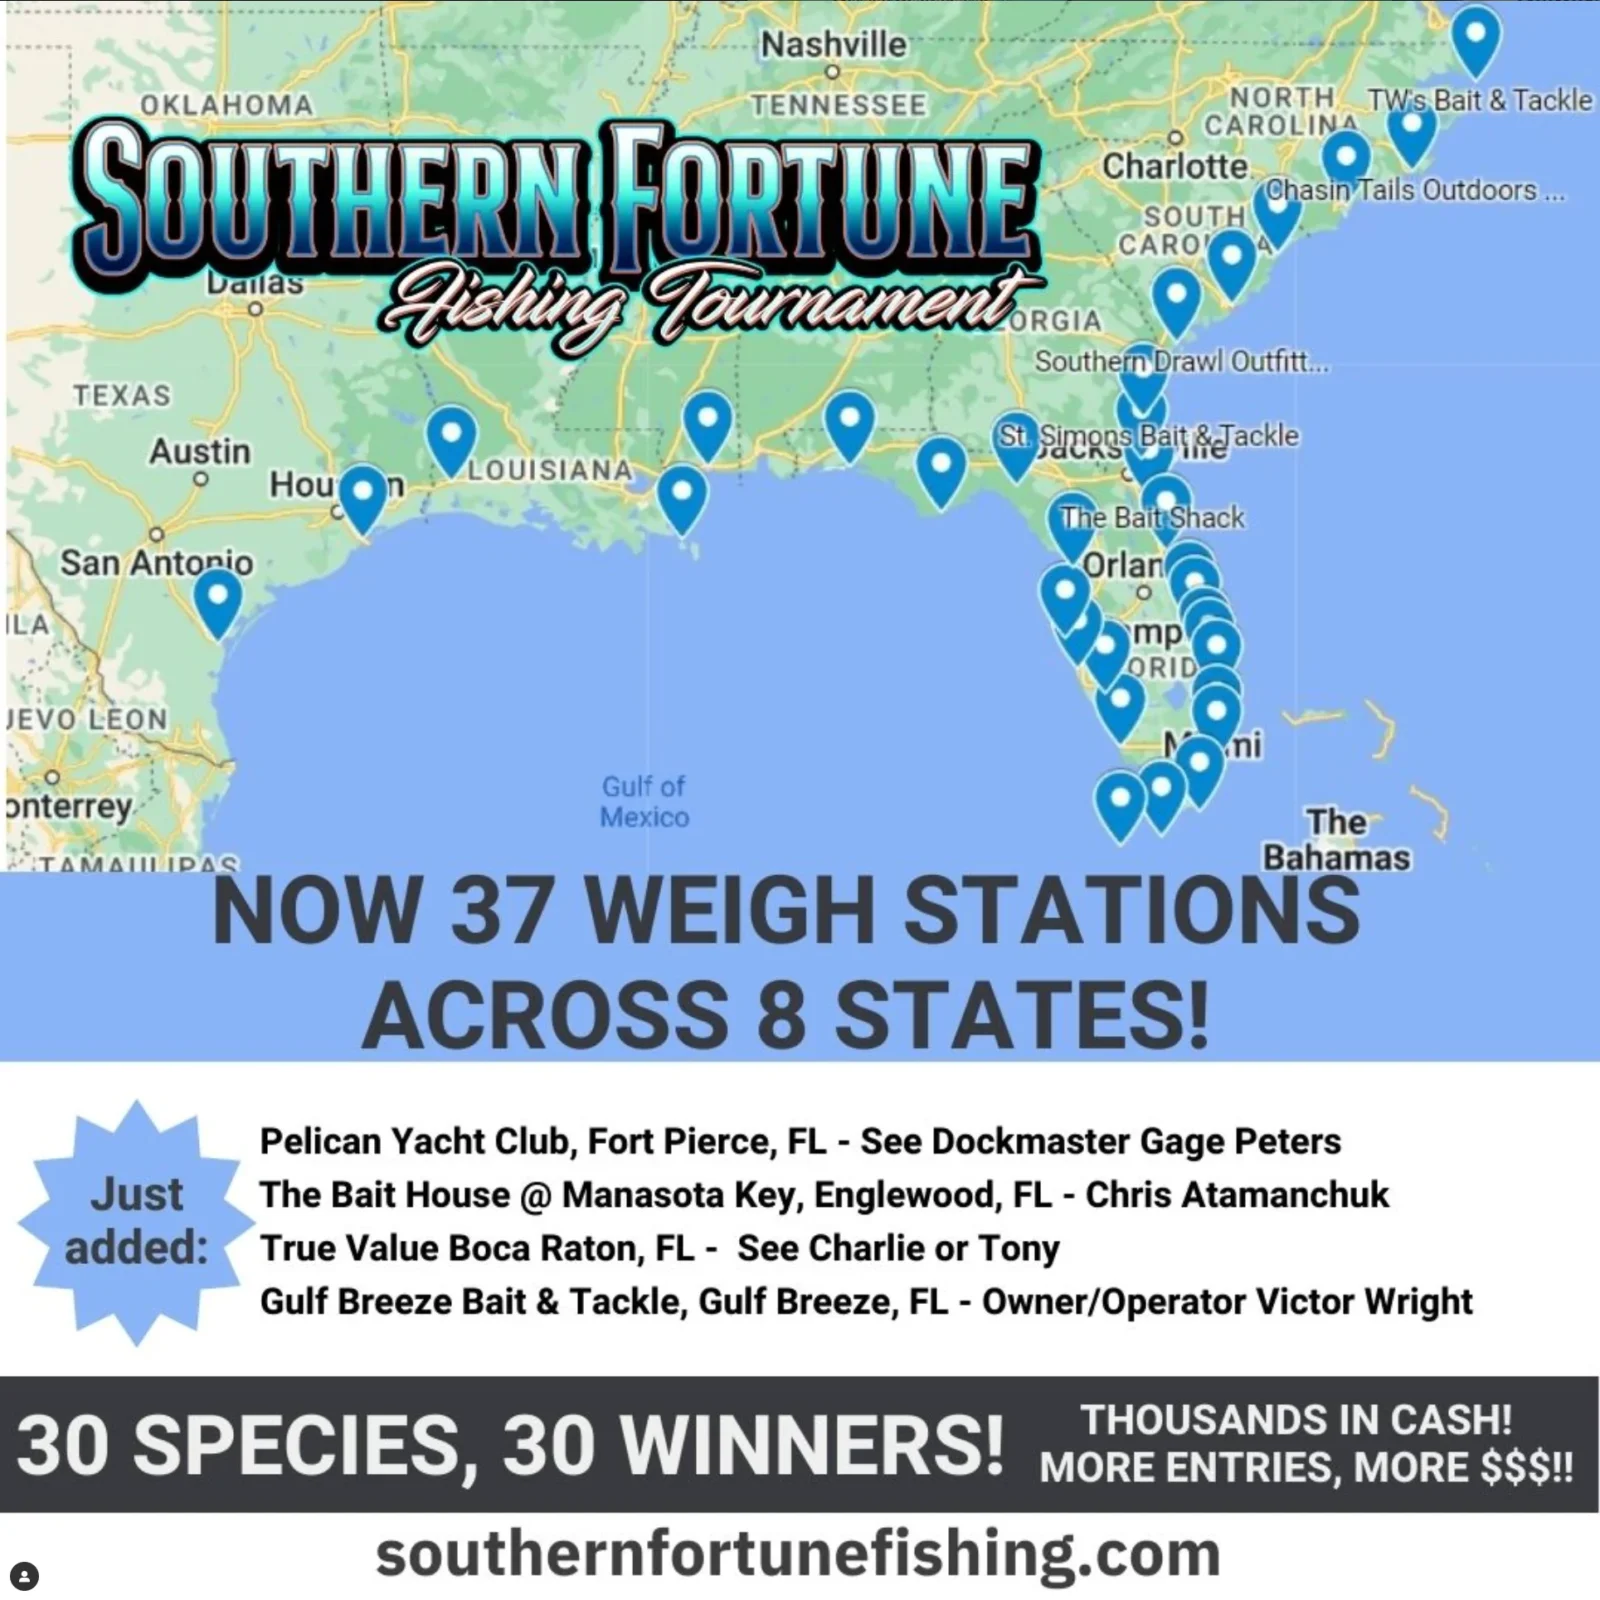 Southern Fortune Fishing Tournament Weigh Stations